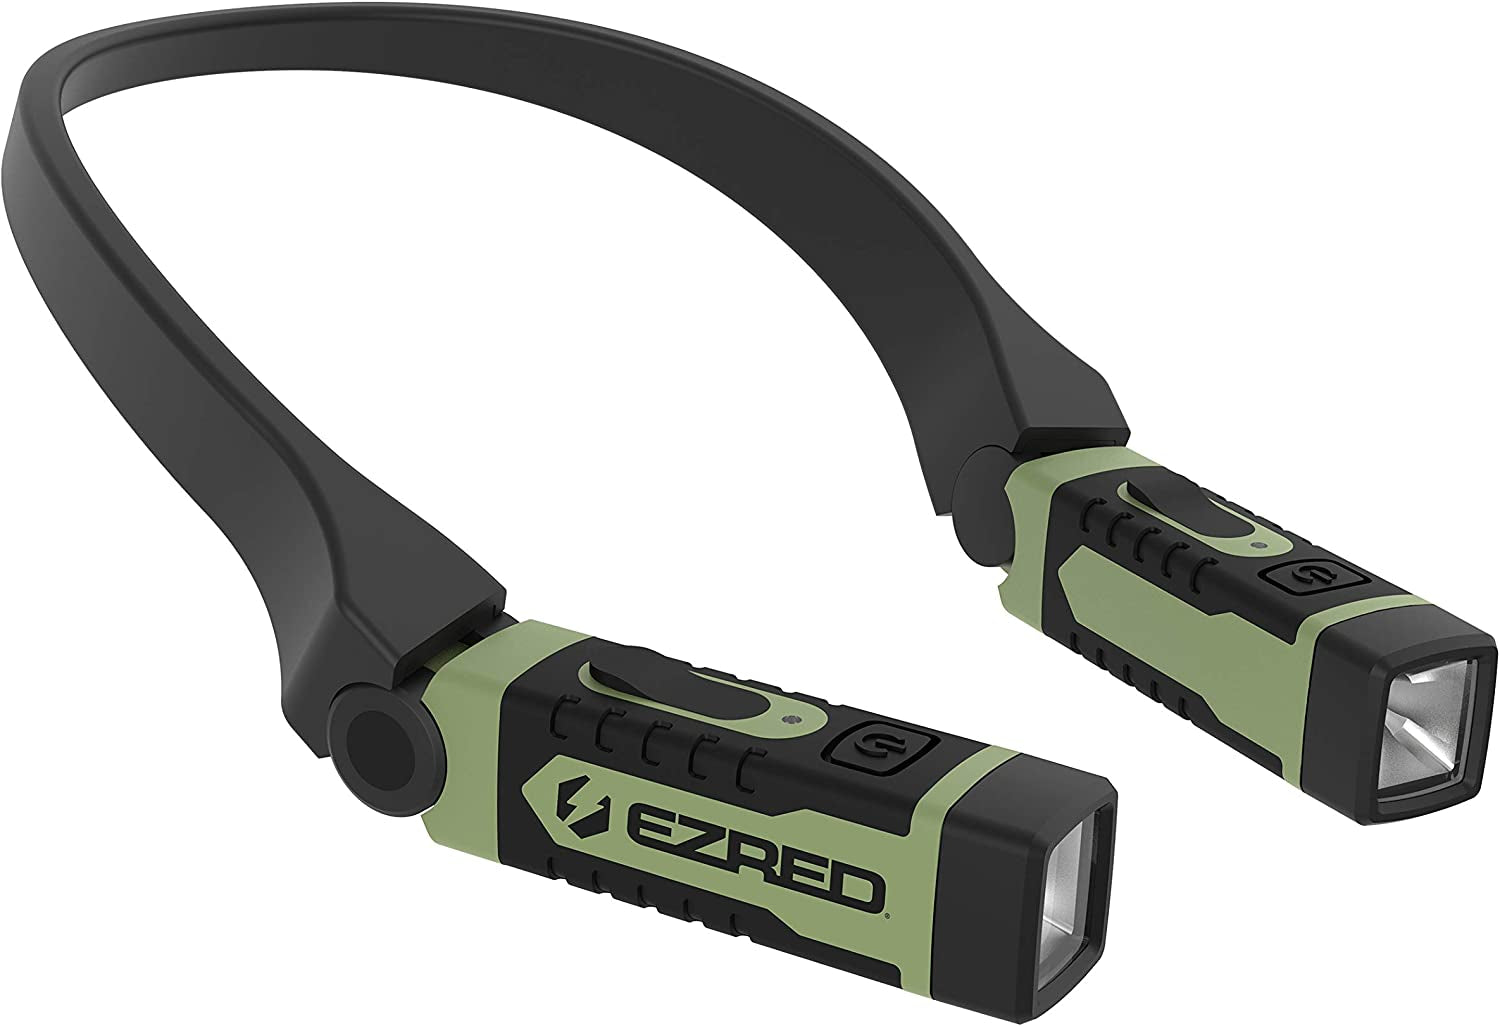 EZRED, EZRED ANYWEAR Rechargeable Neck Light for Hands-Free Lighting, Soft Green